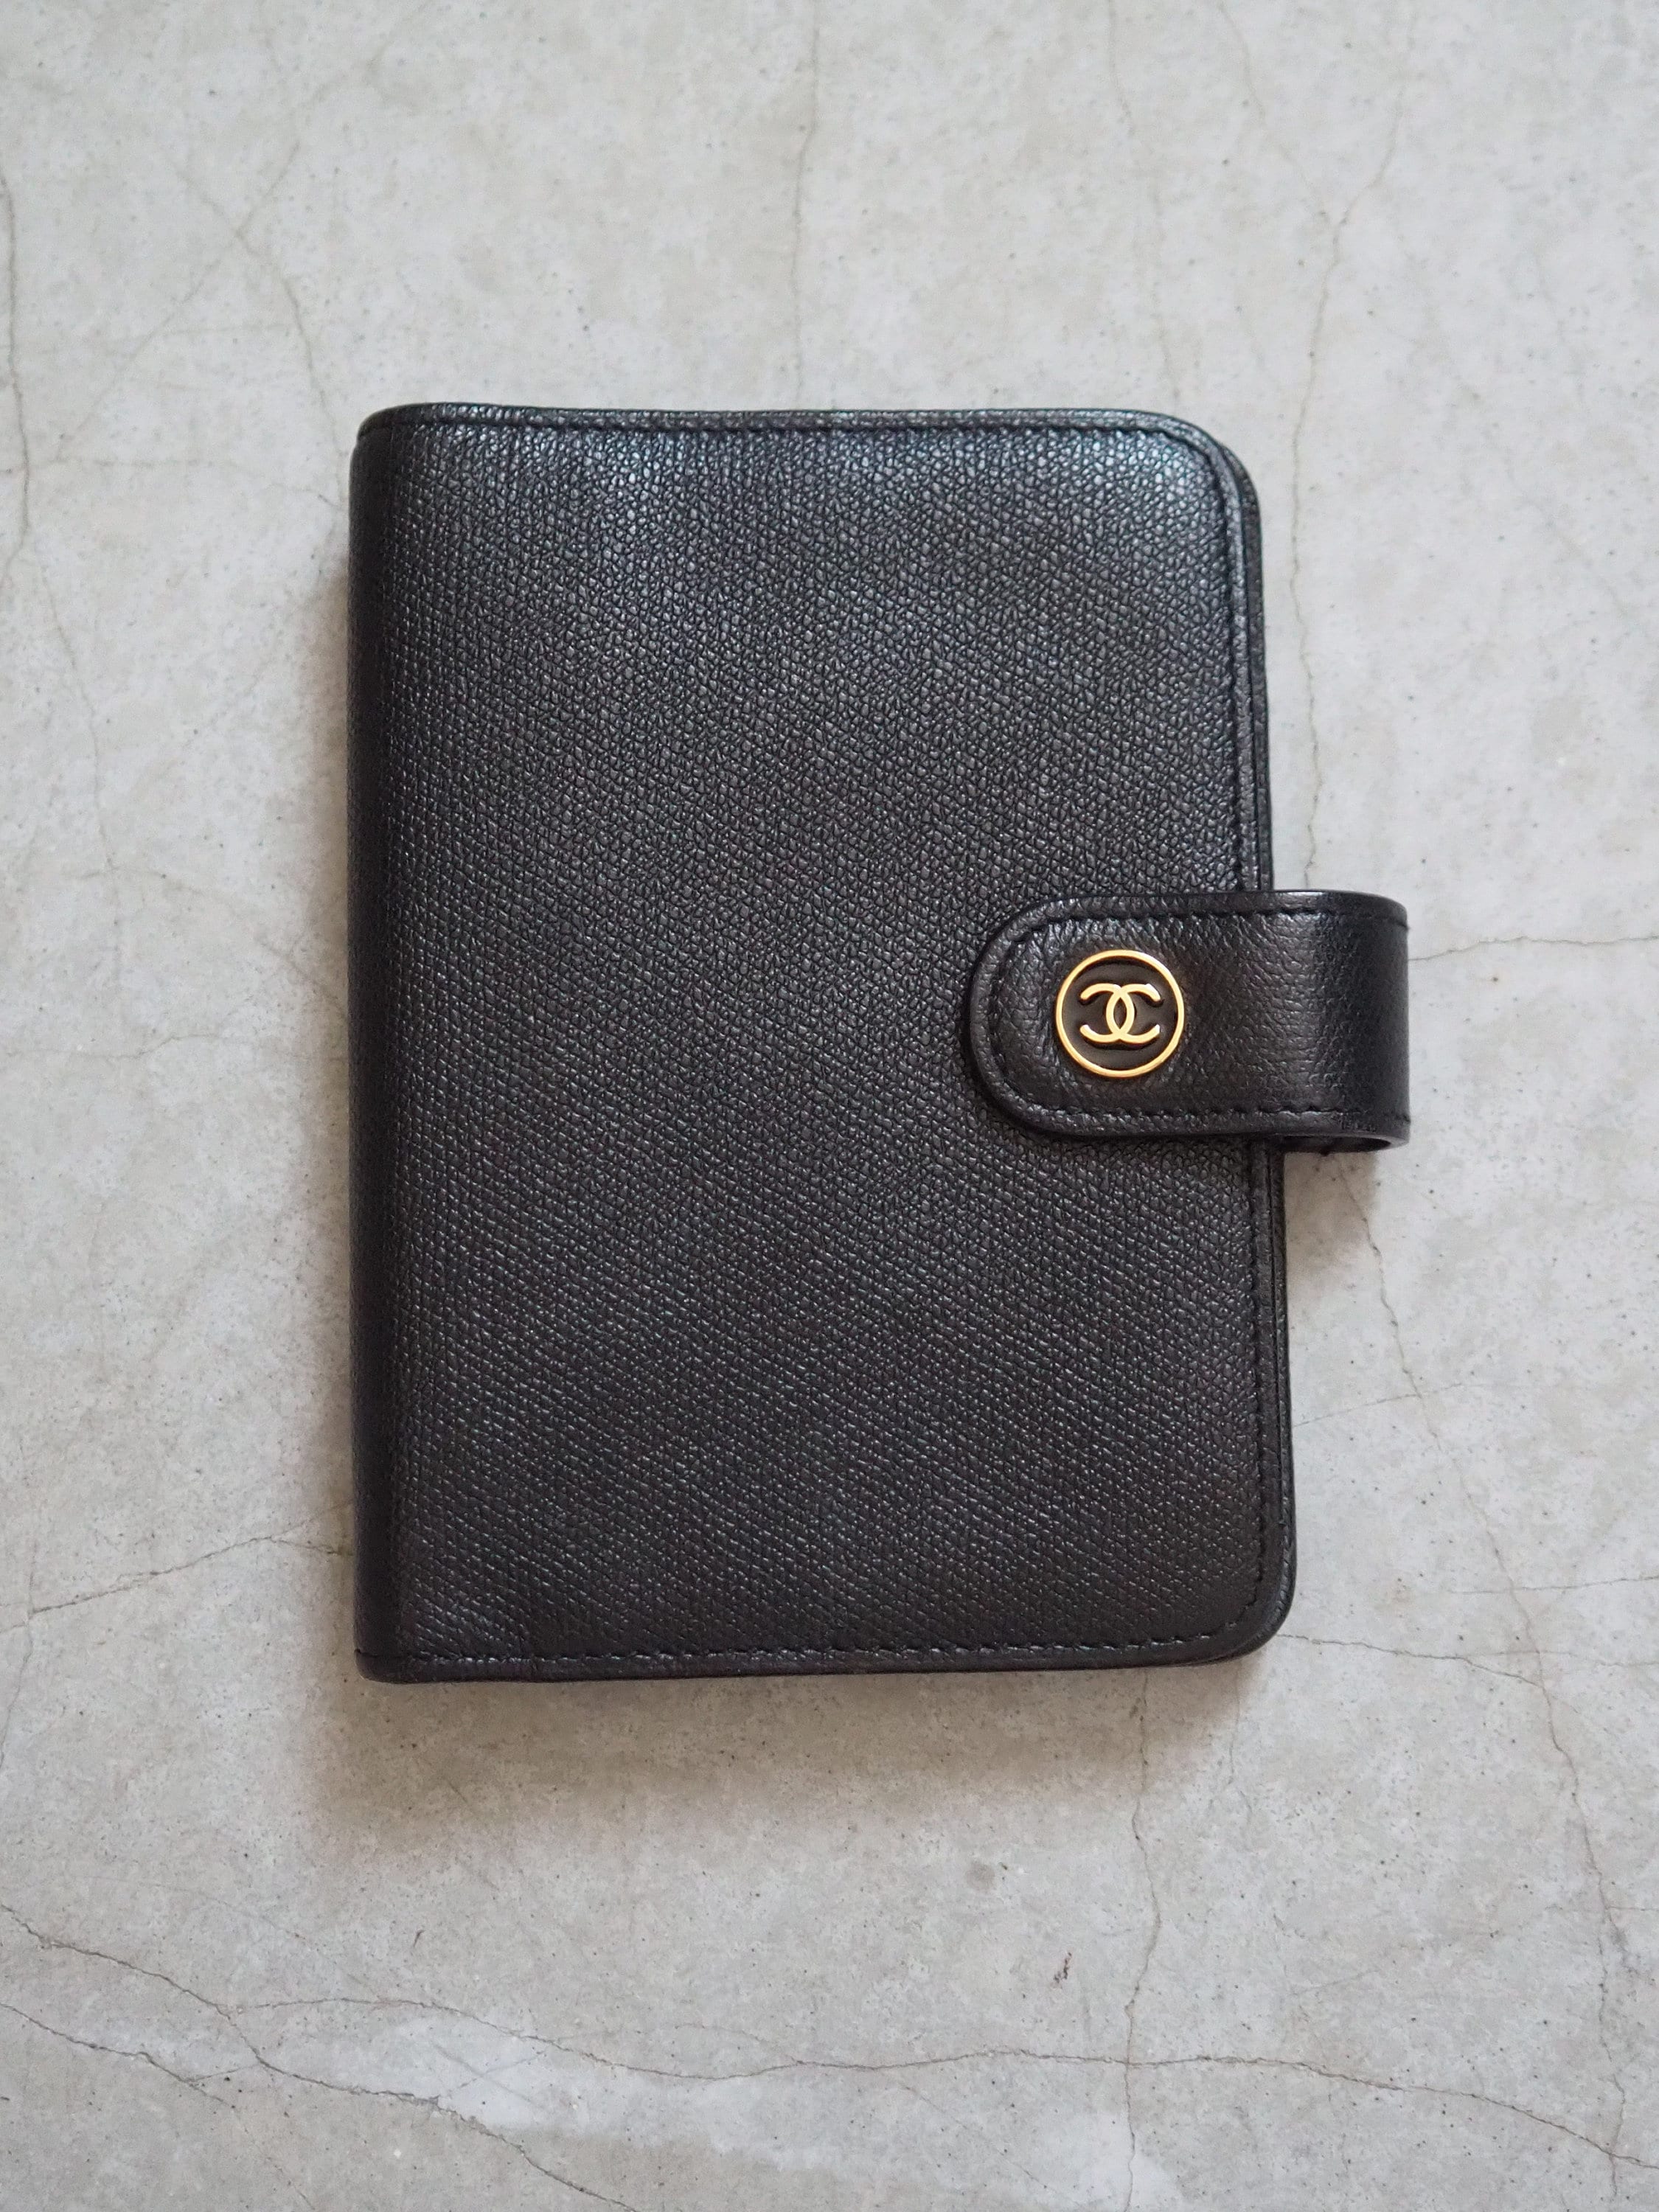 CHANEL CC Logo Button Agenda Leather 6 Ring Diary Black Vintage Authentic